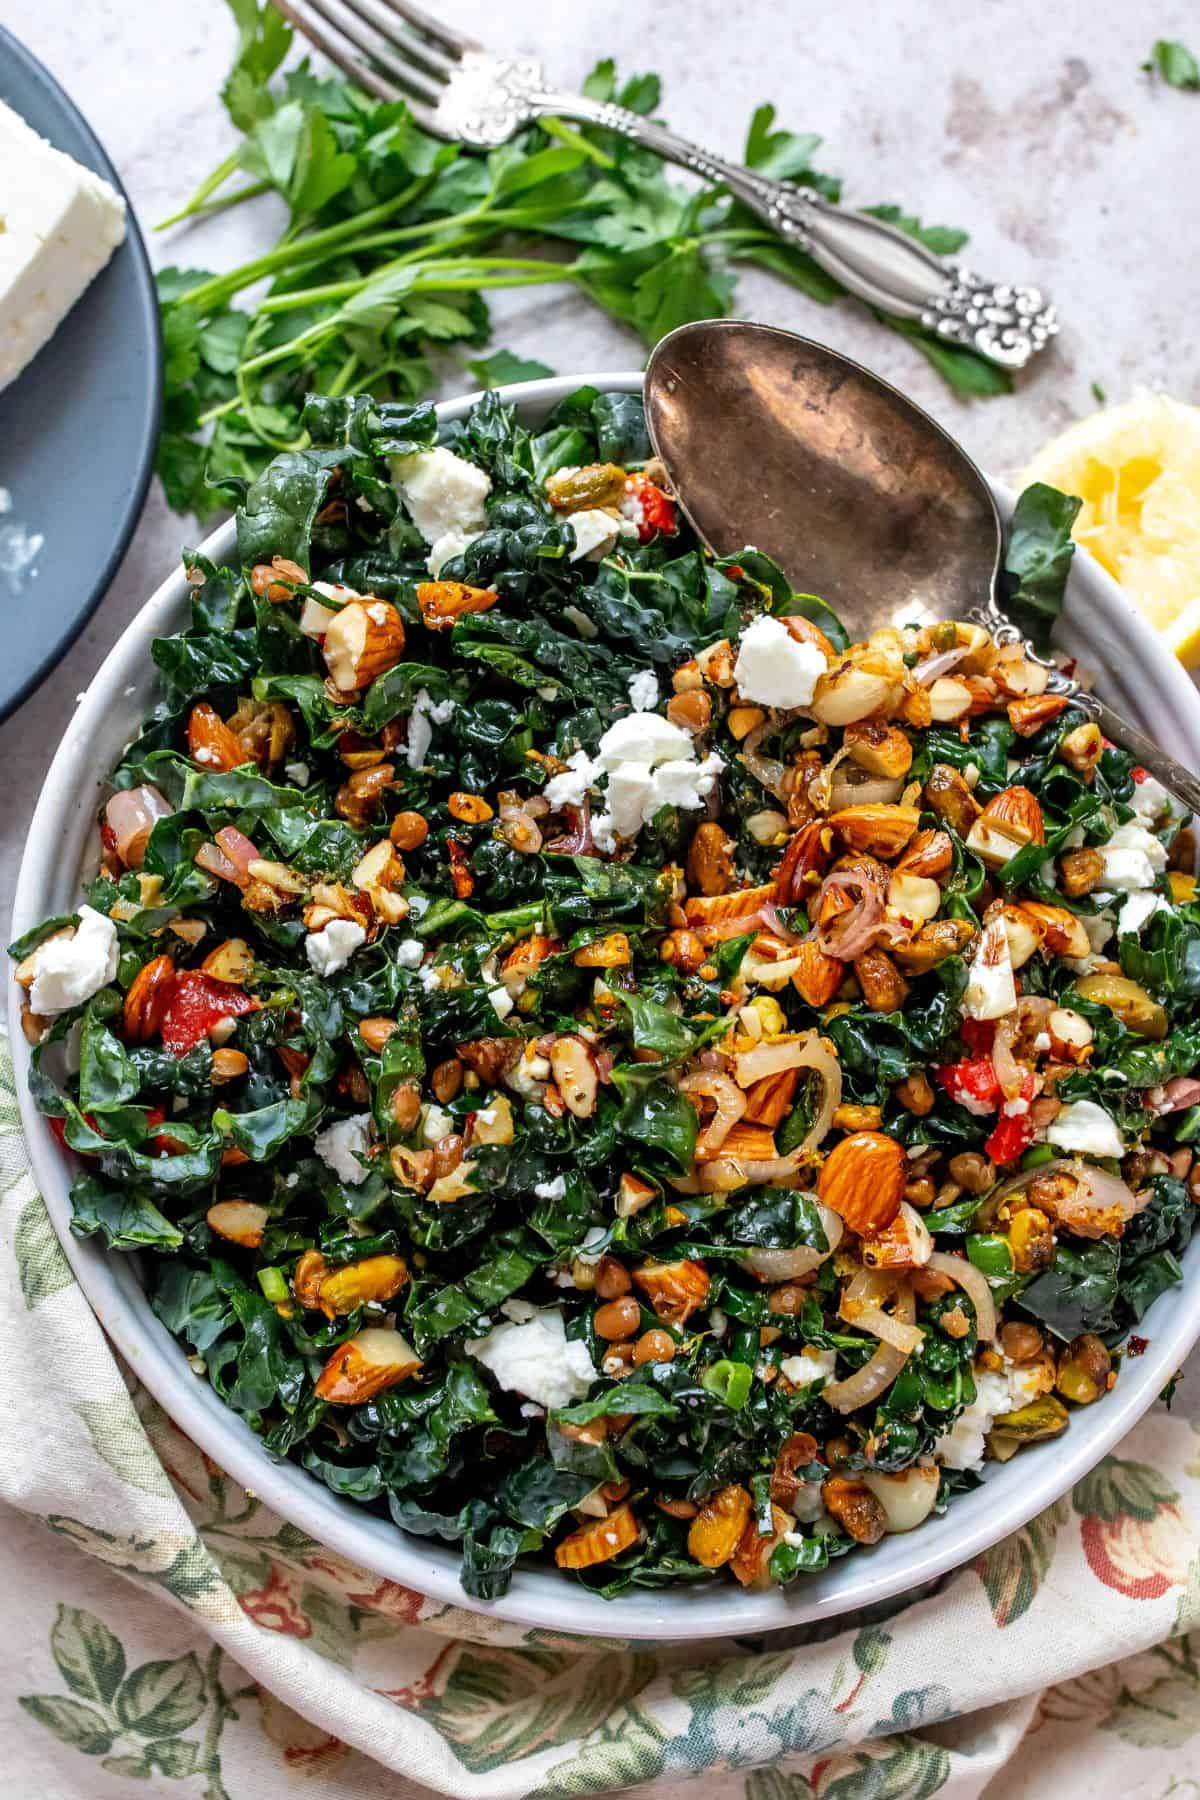 Chopped kale on a speckled plate with a silver spoon on the side. Large silver serving spoon over the salad.